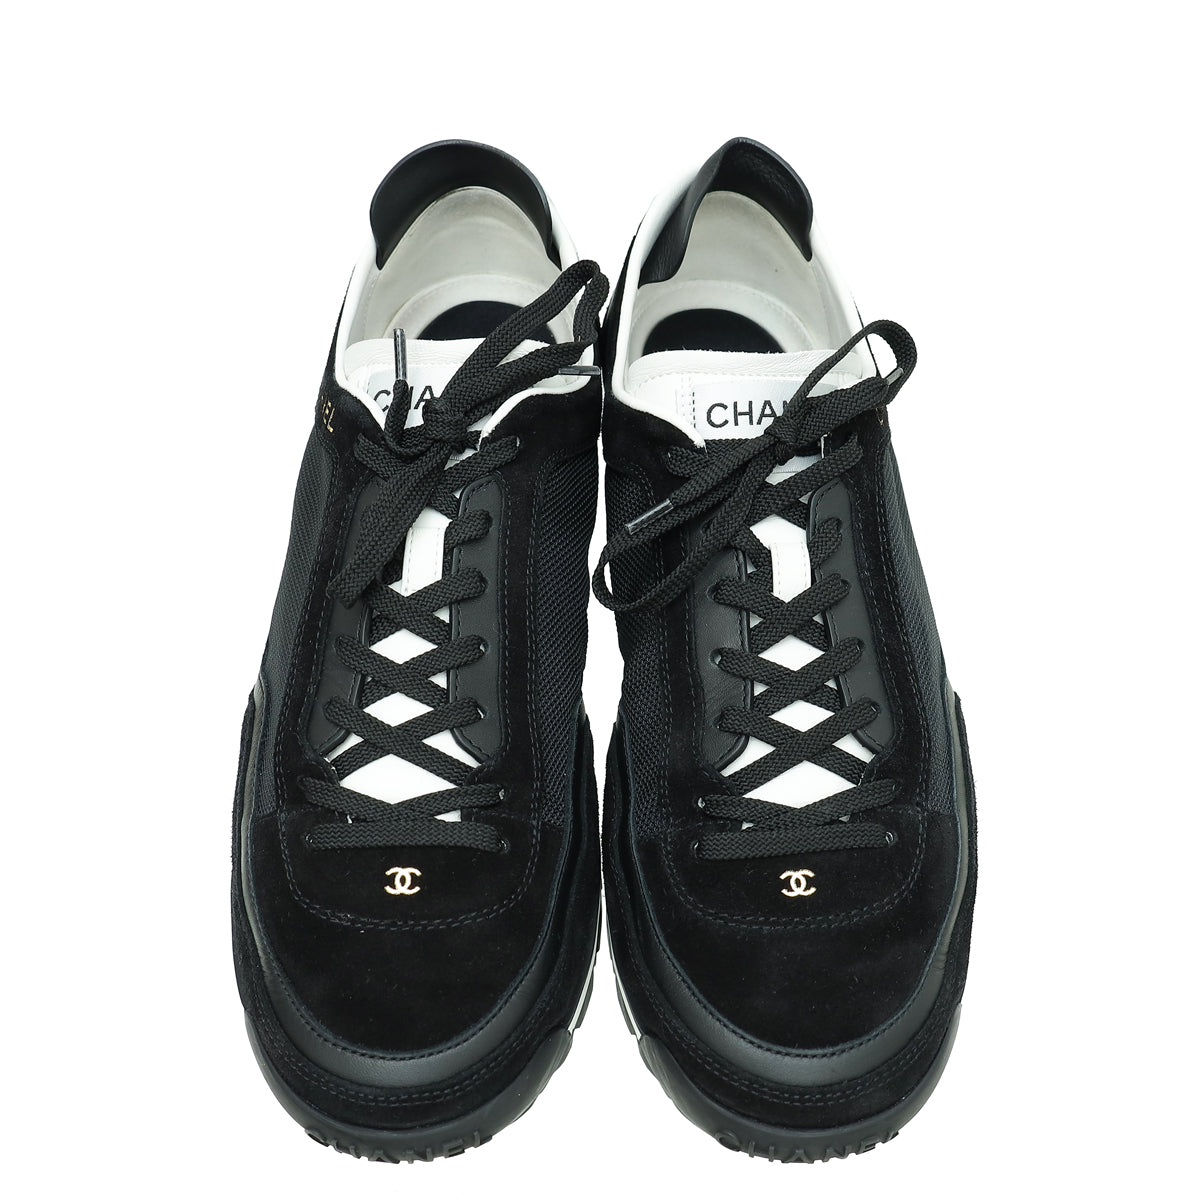 Chanel Black Lace Up Low Top Sneakers 41.5